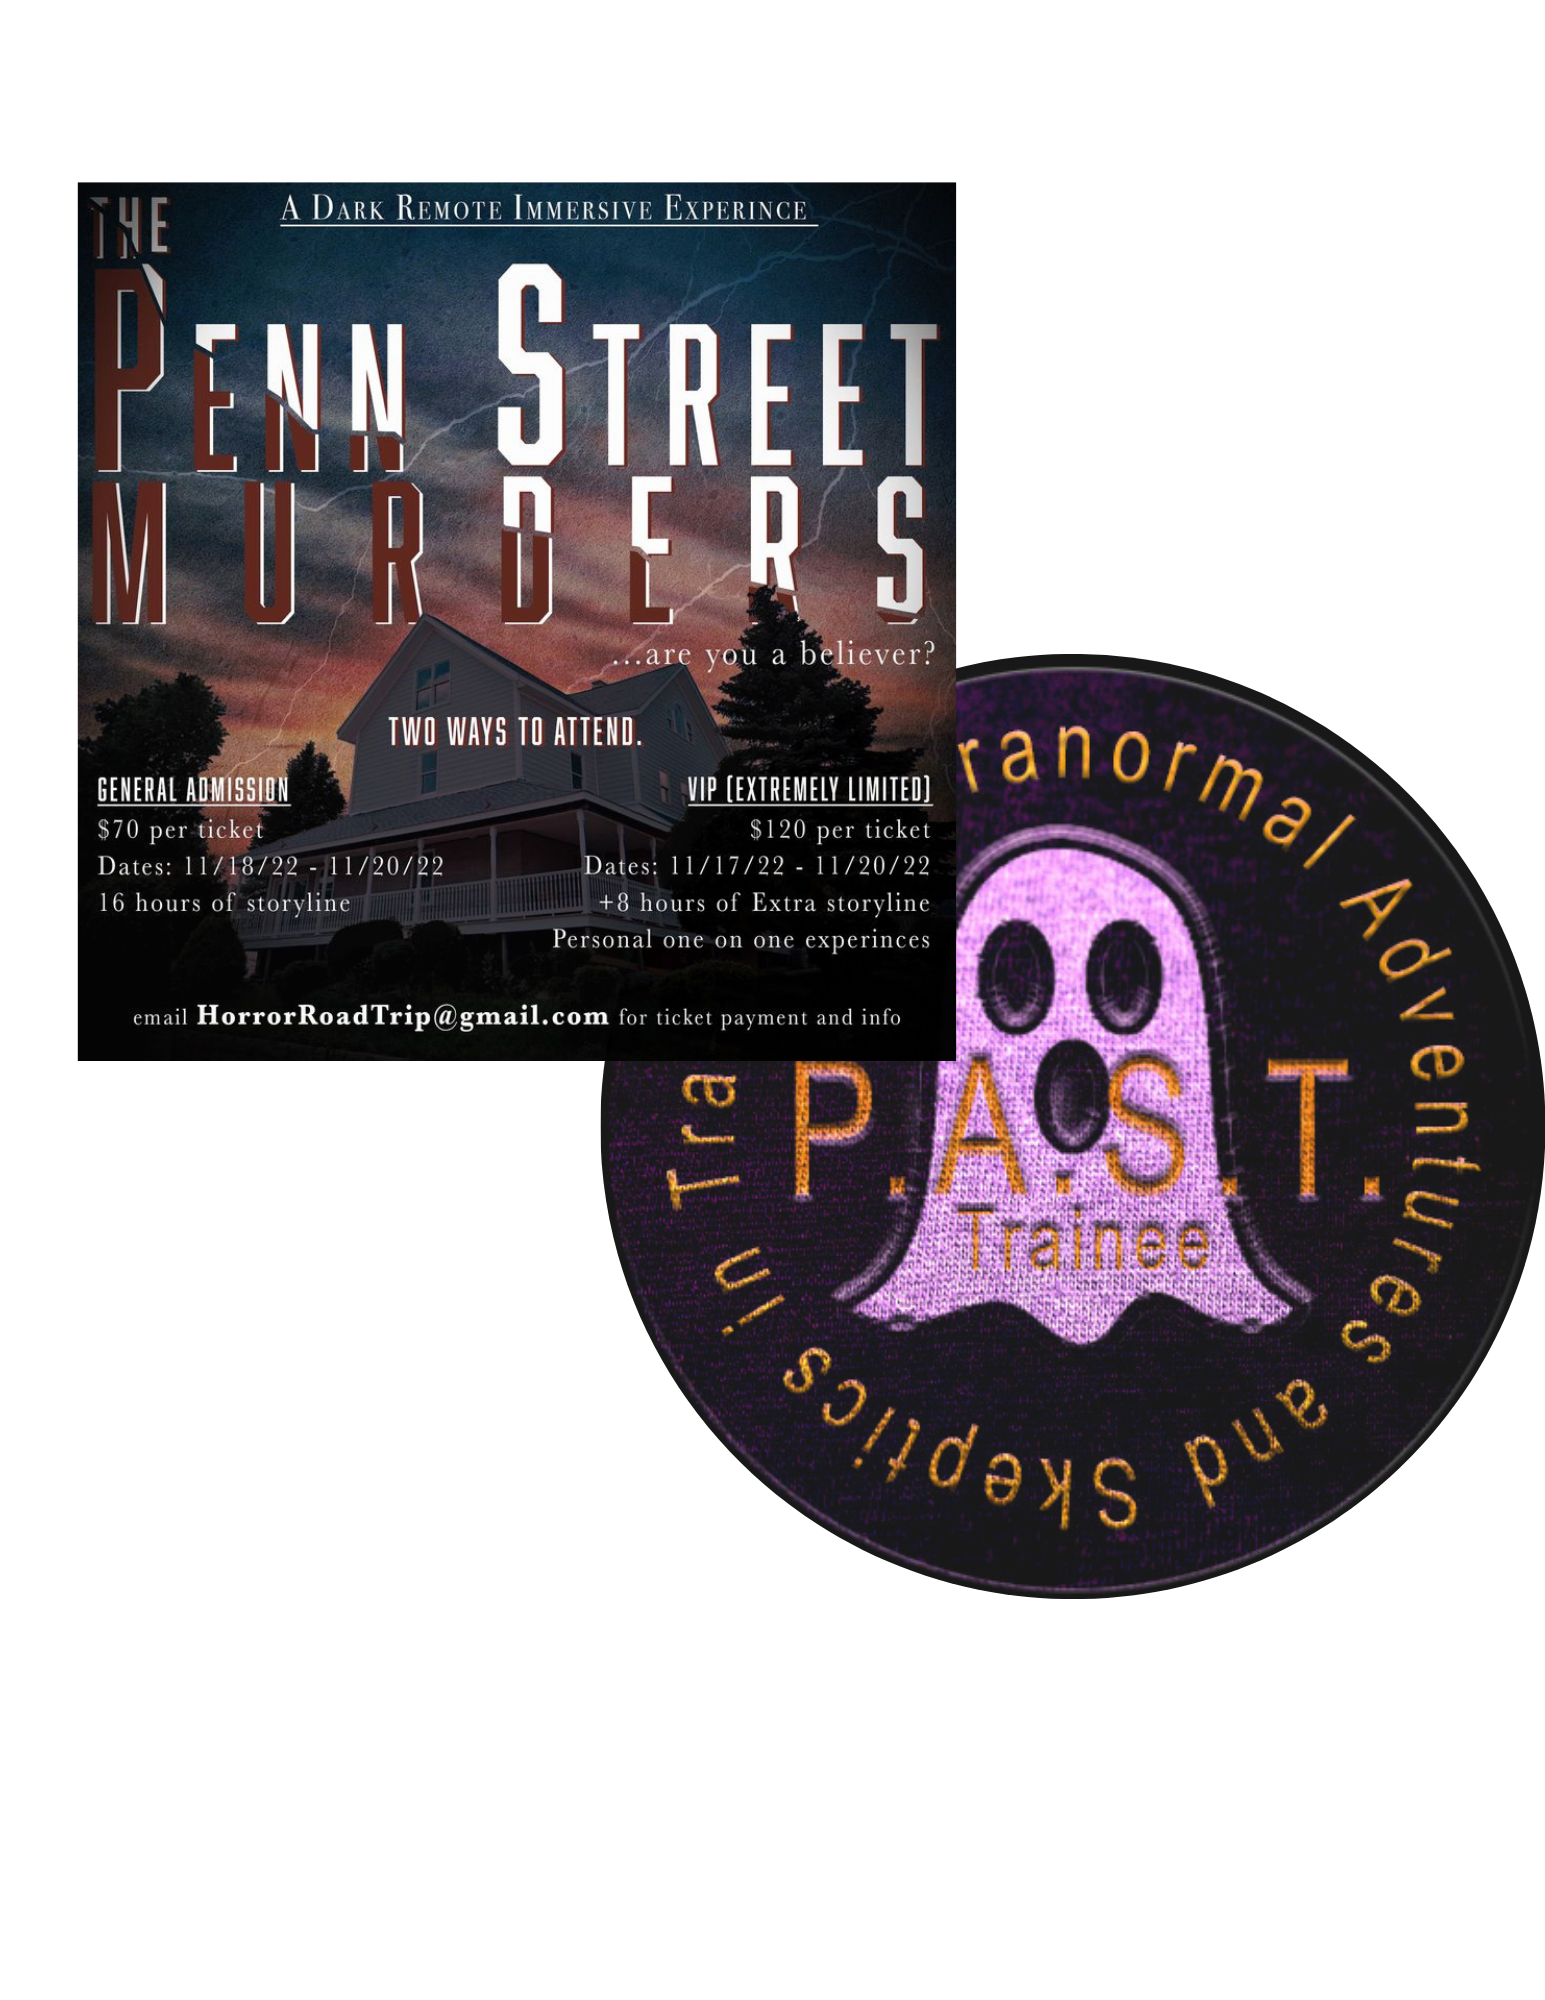 A square graphic of a white multi-level suburban house in front of a sunset with the words "The Penn Street Murders" and "A Dark Remote Immersive Experience" as well as ticket information is superimposed on top of circular graphic of a black clothing patch with a white embroidered ghost on it along with the words "P.A.S.T Trainee". Around the circular edge of the patch are the words "Paranormal Adventures and Skeptics in Training."